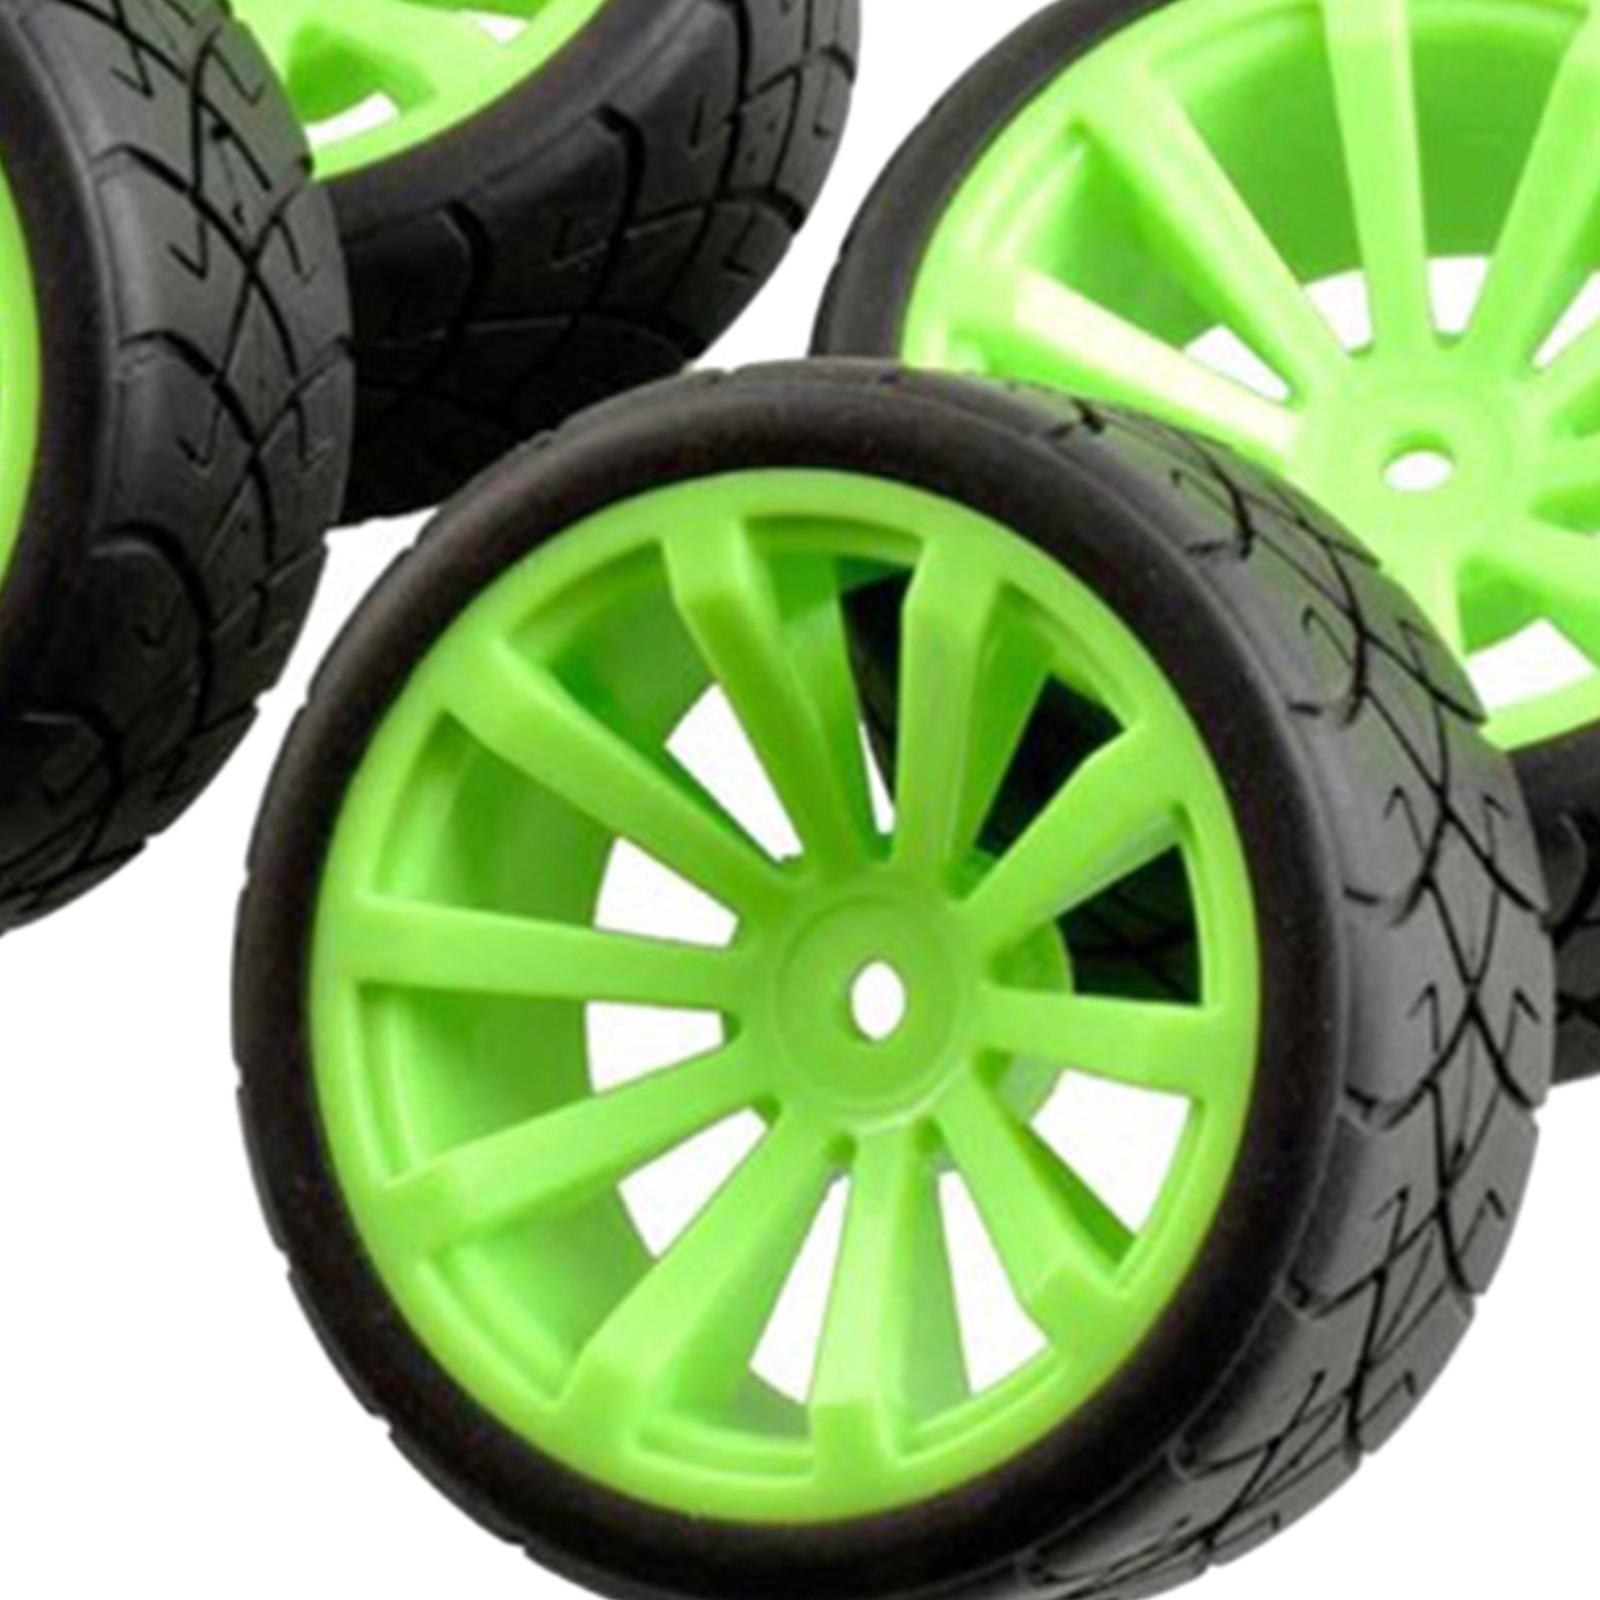 4 Pieces 144001124018124019 for 1:10 Rubber Tire RC Car , Green - image 5 of 7